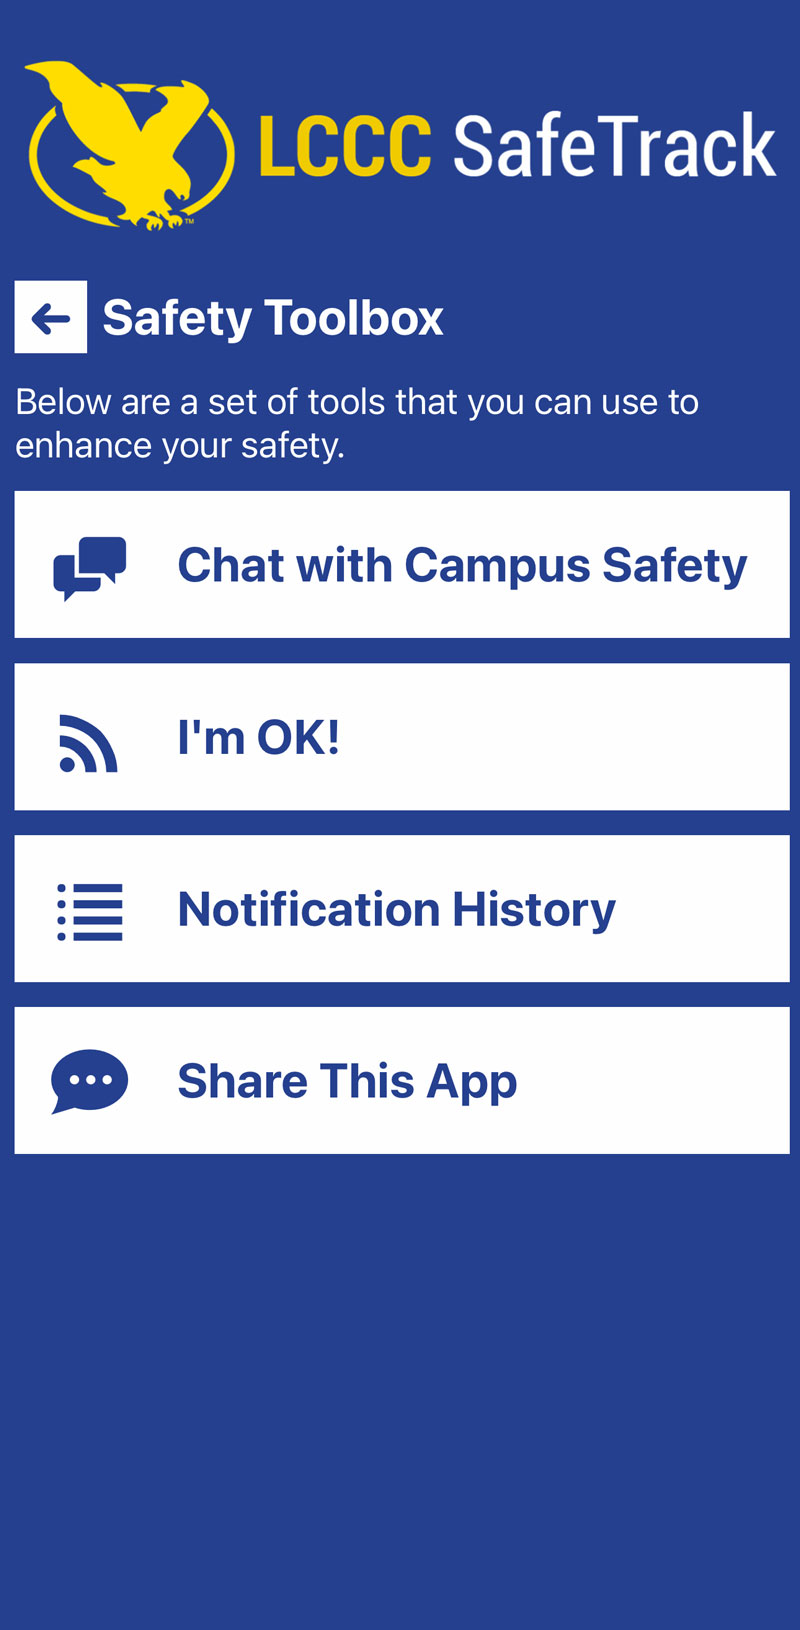 Screenshot of app with Safety Toolbox page showing